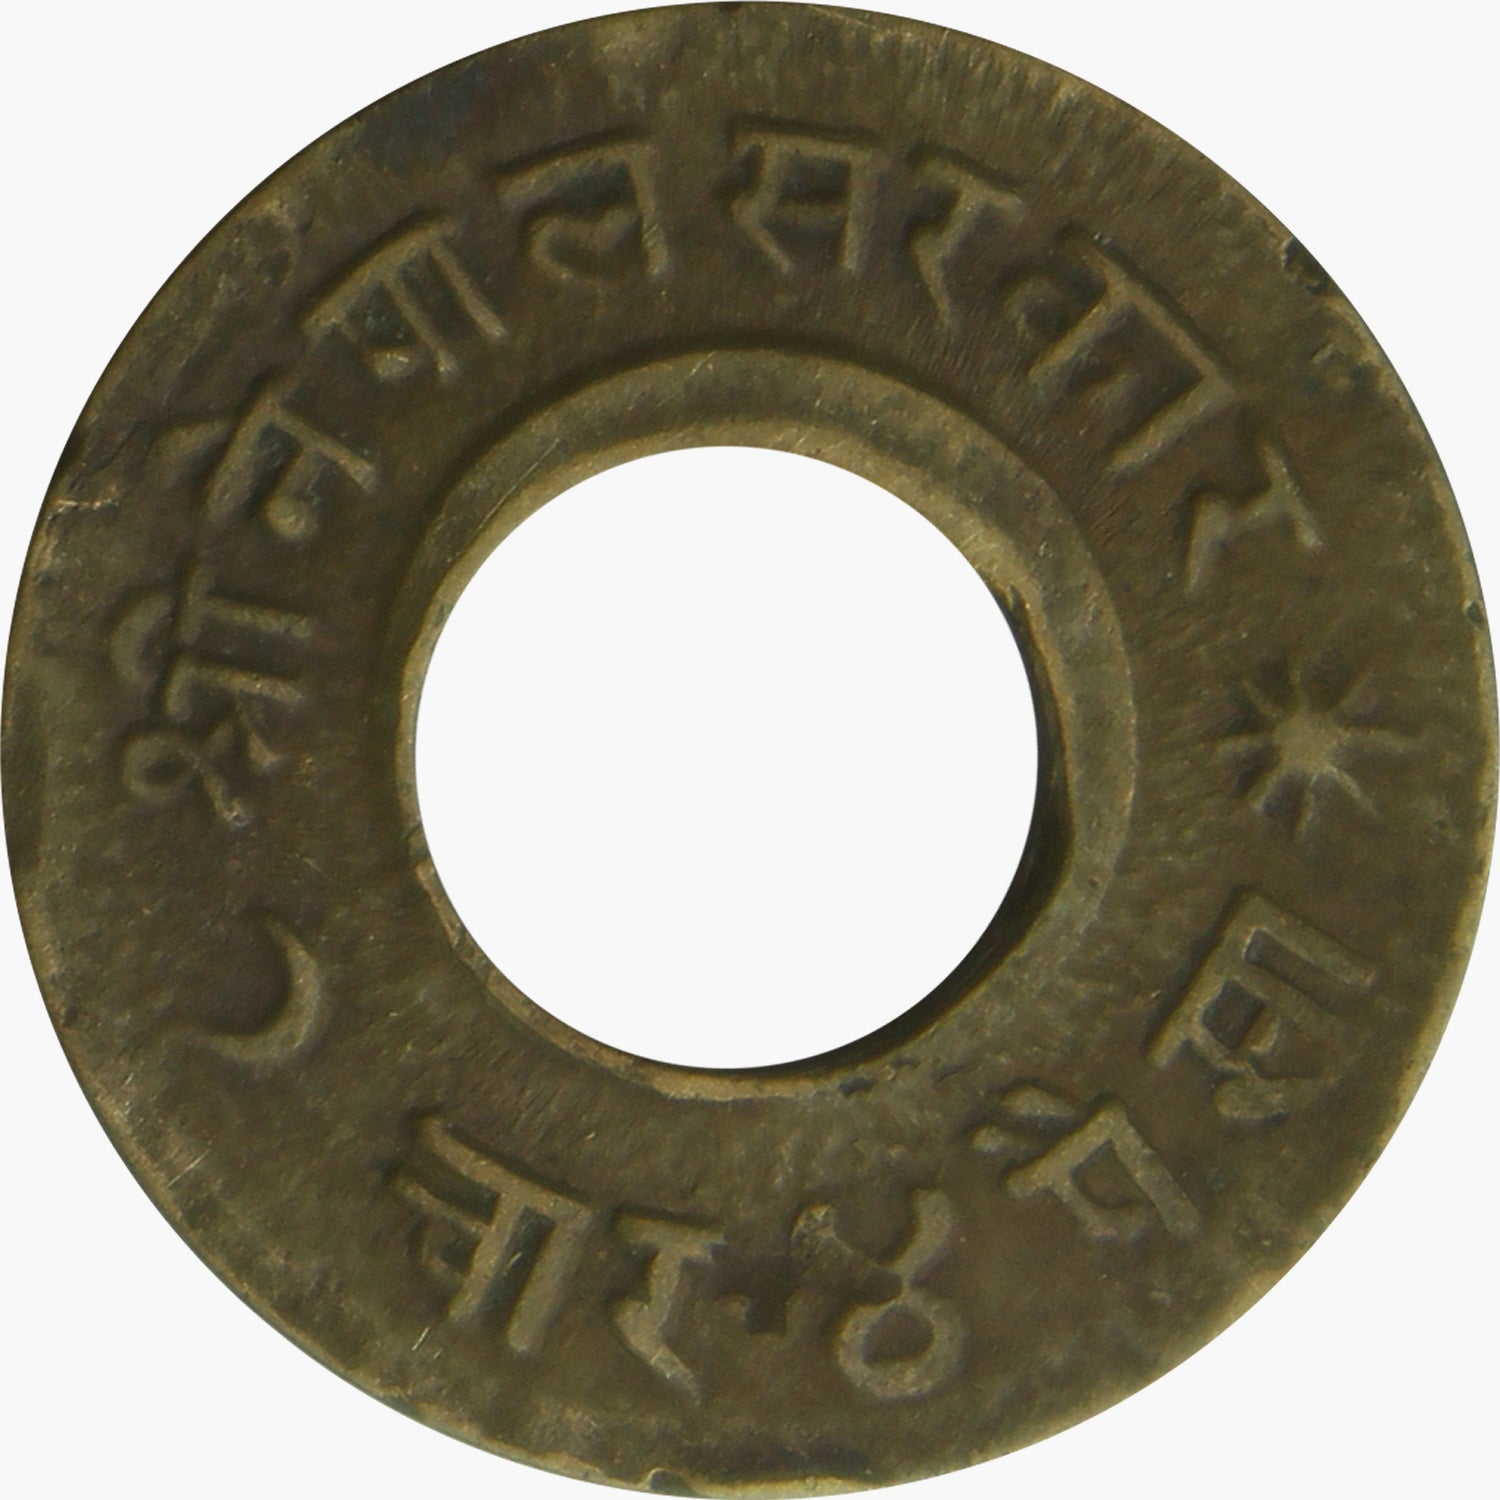 Unearthed - Bullet Coins of the Gurkhas